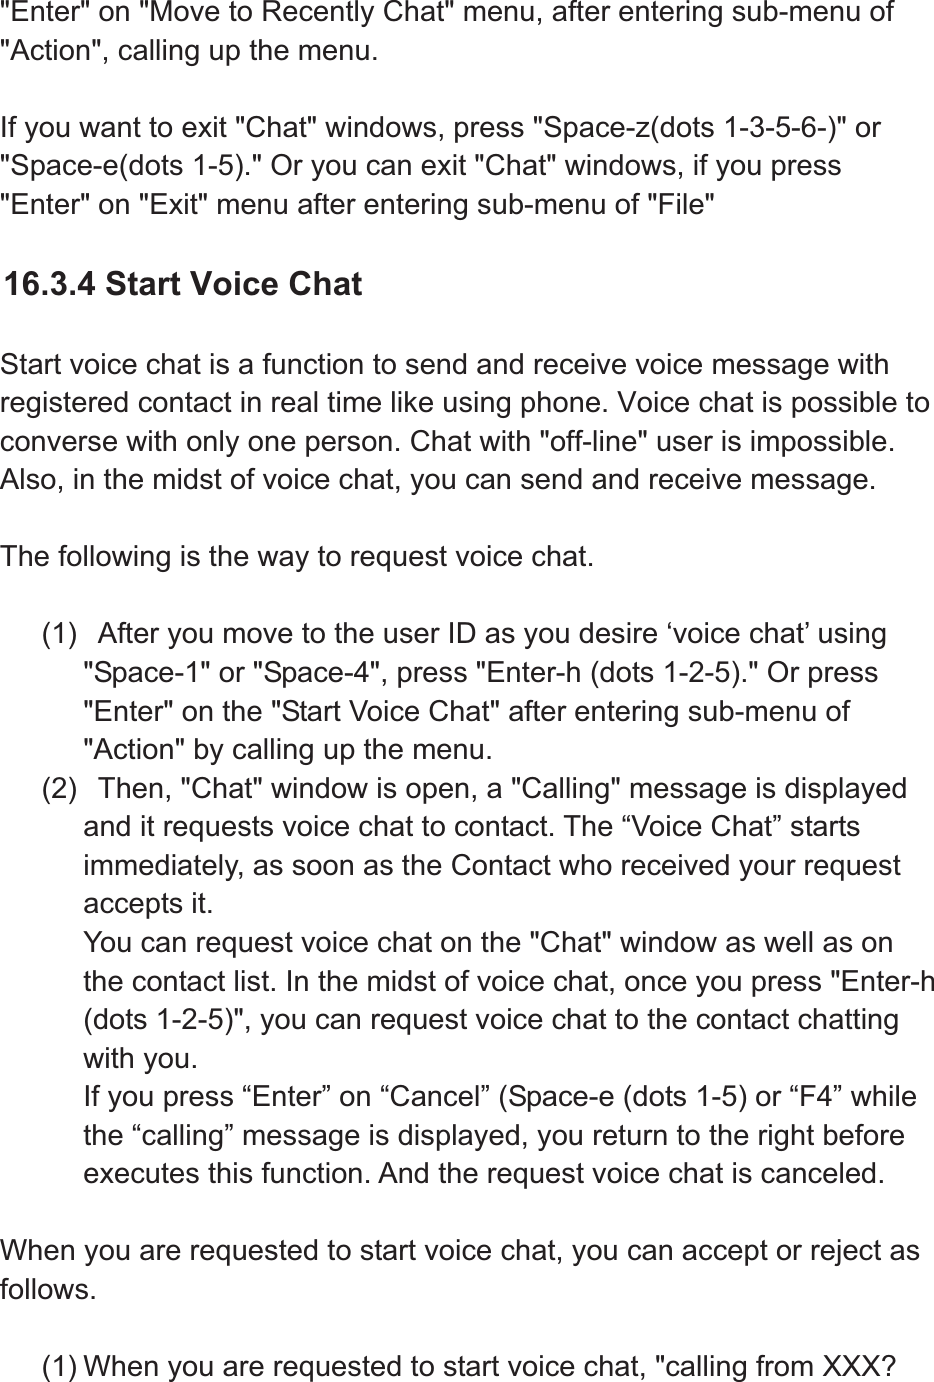 &quot;Enter&quot; on &quot;Move to Recently Chat&quot; menu, after entering sub-menu of &quot;Action&quot;, calling up the menu.   If you want to exit &quot;Chat&quot; windows, press &quot;Space-z(dots 1-3-5-6-)&quot; or &quot;Space-e(dots 1-5).&quot; Or you can exit &quot;Chat&quot; windows, if you press &quot;Enter&quot; on &quot;Exit&quot; menu after entering sub-menu of &quot;File&quot;   16.3.4 Start Voice Chat Start voice chat is a function to send and receive voice message with registered contact in real time like using phone. Voice chat is possible to converse with only one person. Chat with &quot;off-line&quot; user is impossible. Also, in the midst of voice chat, you can send and receive message.   The following is the way to request voice chat. (1)   After you move to the user ID as you desire ‘voice chat’ using &quot;Space-1&quot; or &quot;Space-4&quot;, press &quot;Enter-h (dots 1-2-5).&quot; Or press &quot;Enter&quot; on the &quot;Start Voice Chat&quot; after entering sub-menu of &quot;Action&quot; by calling up the menu. (2)   Then, &quot;Chat&quot; window is open, a &quot;Calling&quot; message is displayed and it requests voice chat to contact. The “Voice Chat” starts immediately, as soon as the Contact who received your request accepts it.You can request voice chat on the &quot;Chat&quot; window as well as on the contact list. In the midst of voice chat, once you press &quot;Enter-h (dots 1-2-5)&quot;, you can request voice chat to the contact chatting with you.   If you press “Enter” on “Cancel” (Space-e (dots 1-5) or “F4” while the “calling” message is displayed, you return to the right before executes this function. And the request voice chat is canceled.   When you are requested to start voice chat, you can accept or reject as follows.(1) When you are requested to start voice chat, &quot;calling from XXX? 